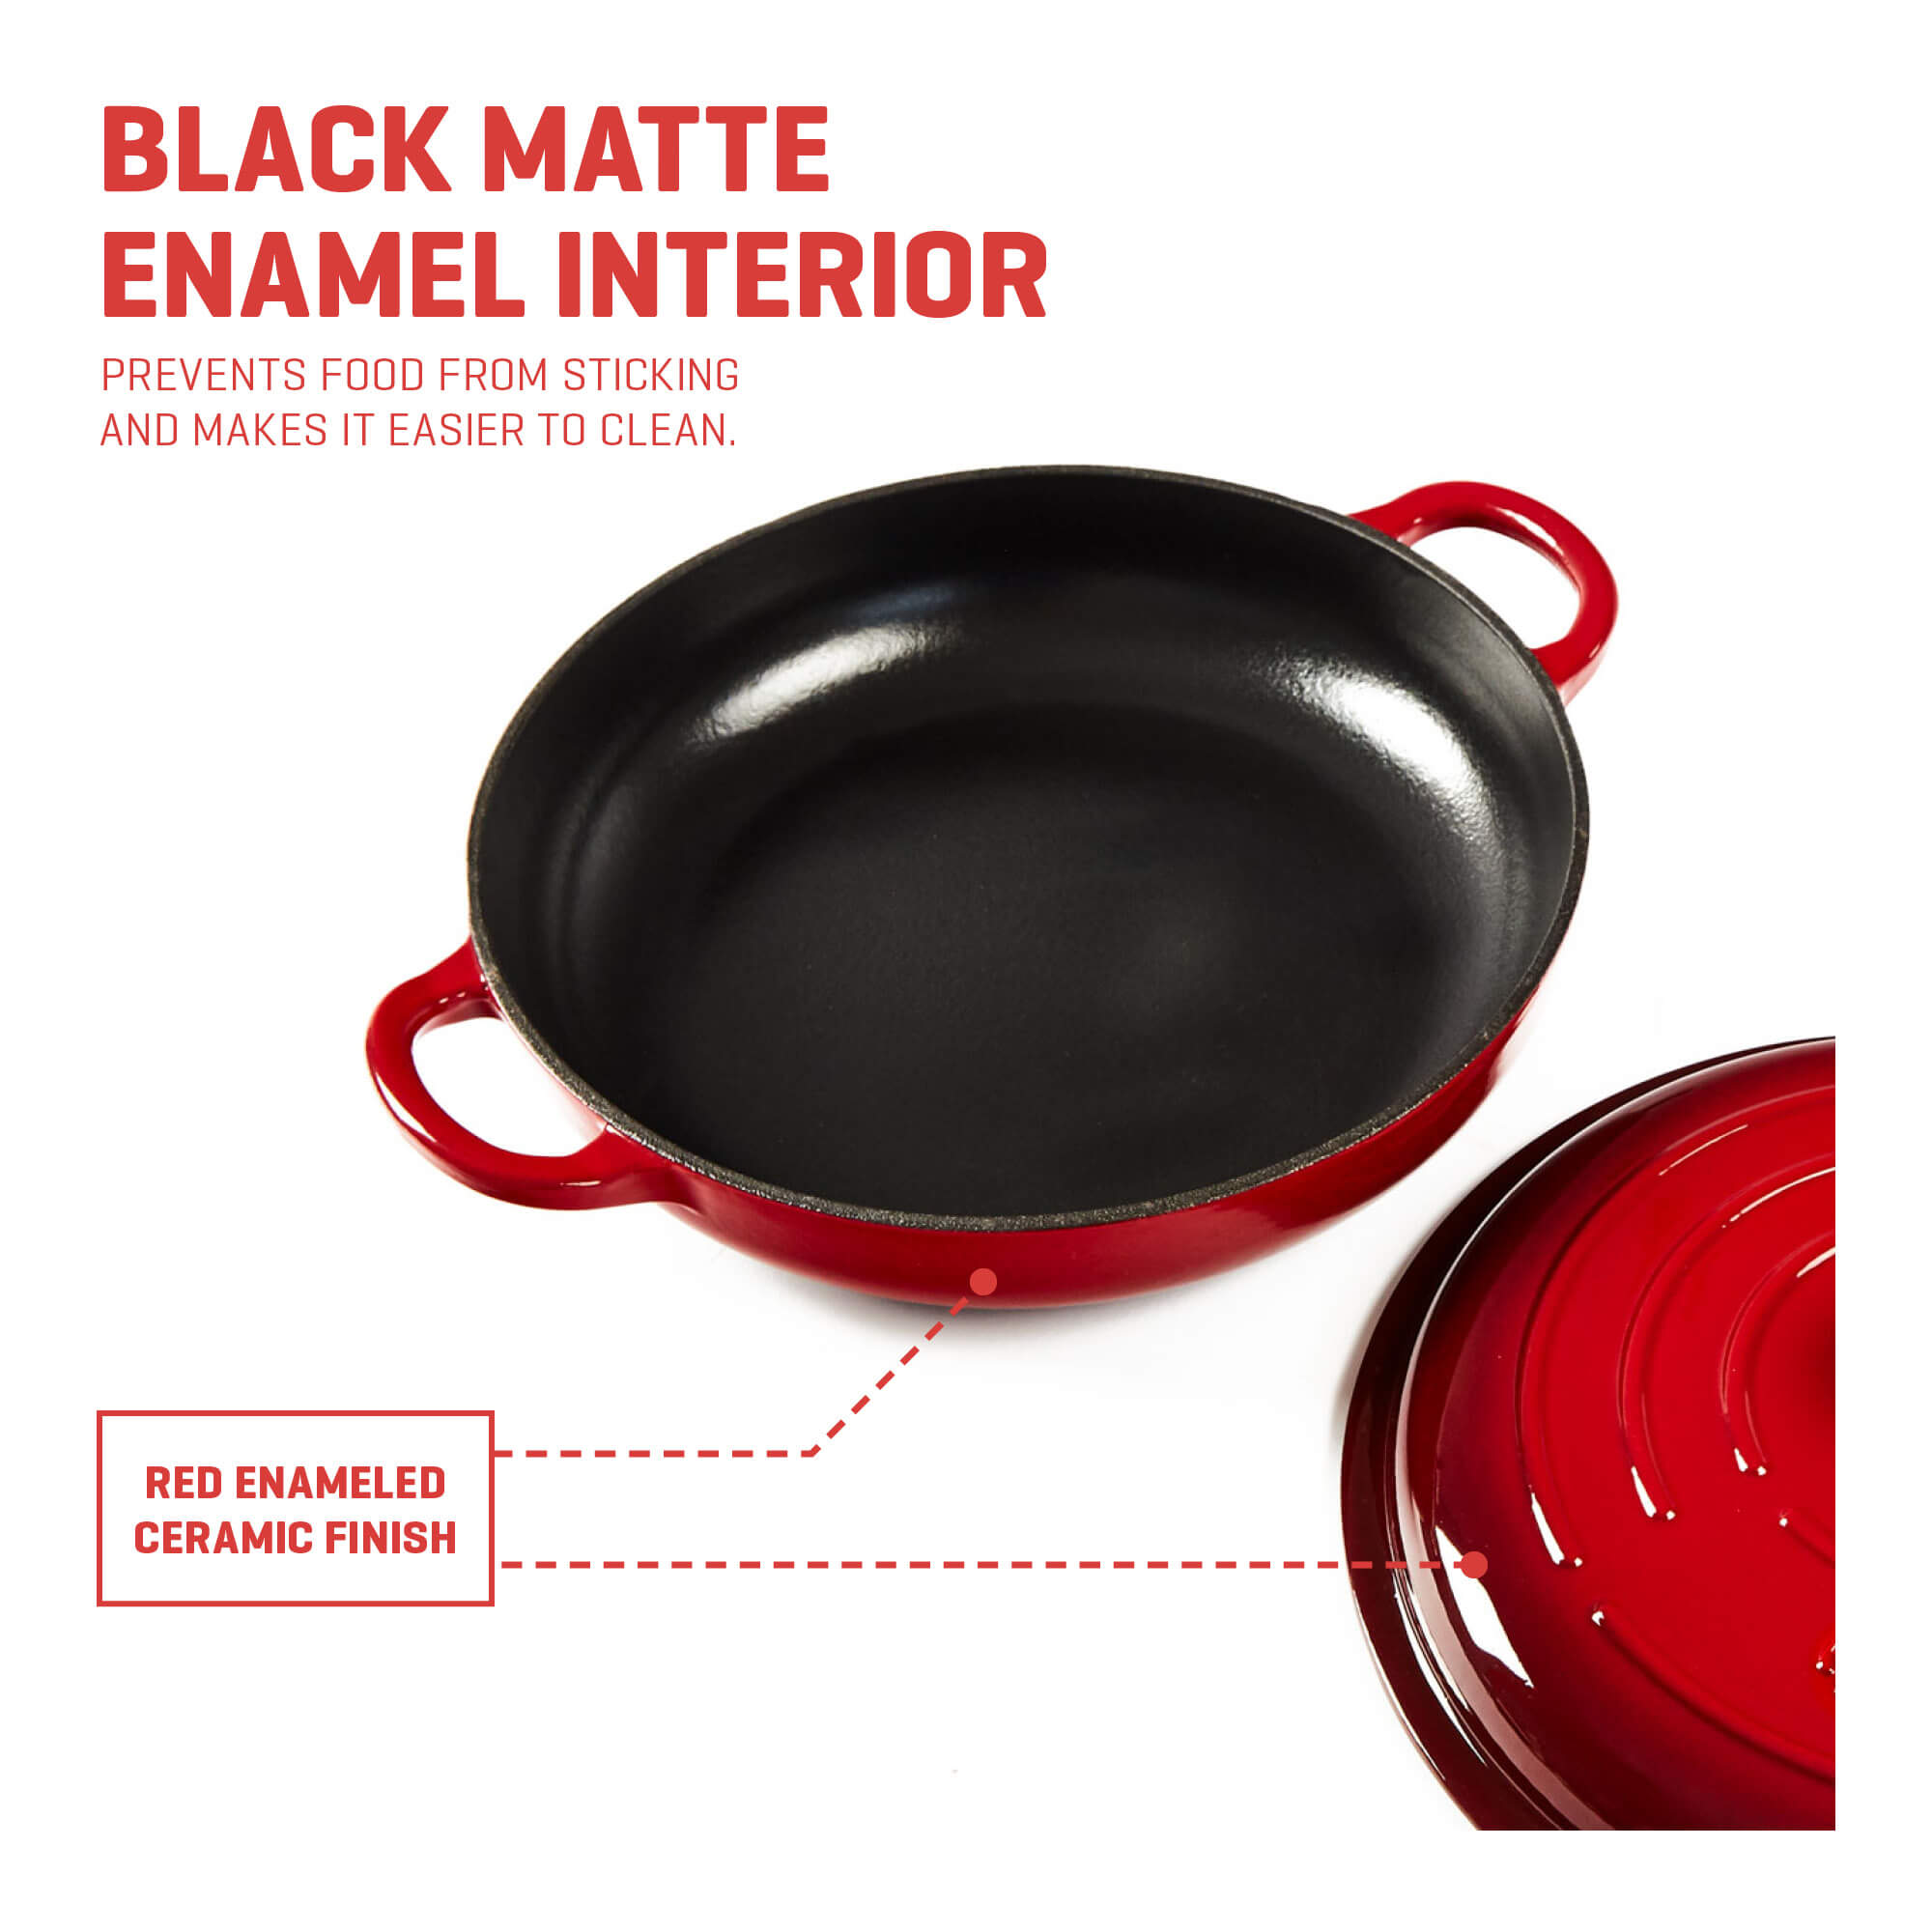 Enameled Cast Iron Vs Cast Iron. Which is better?